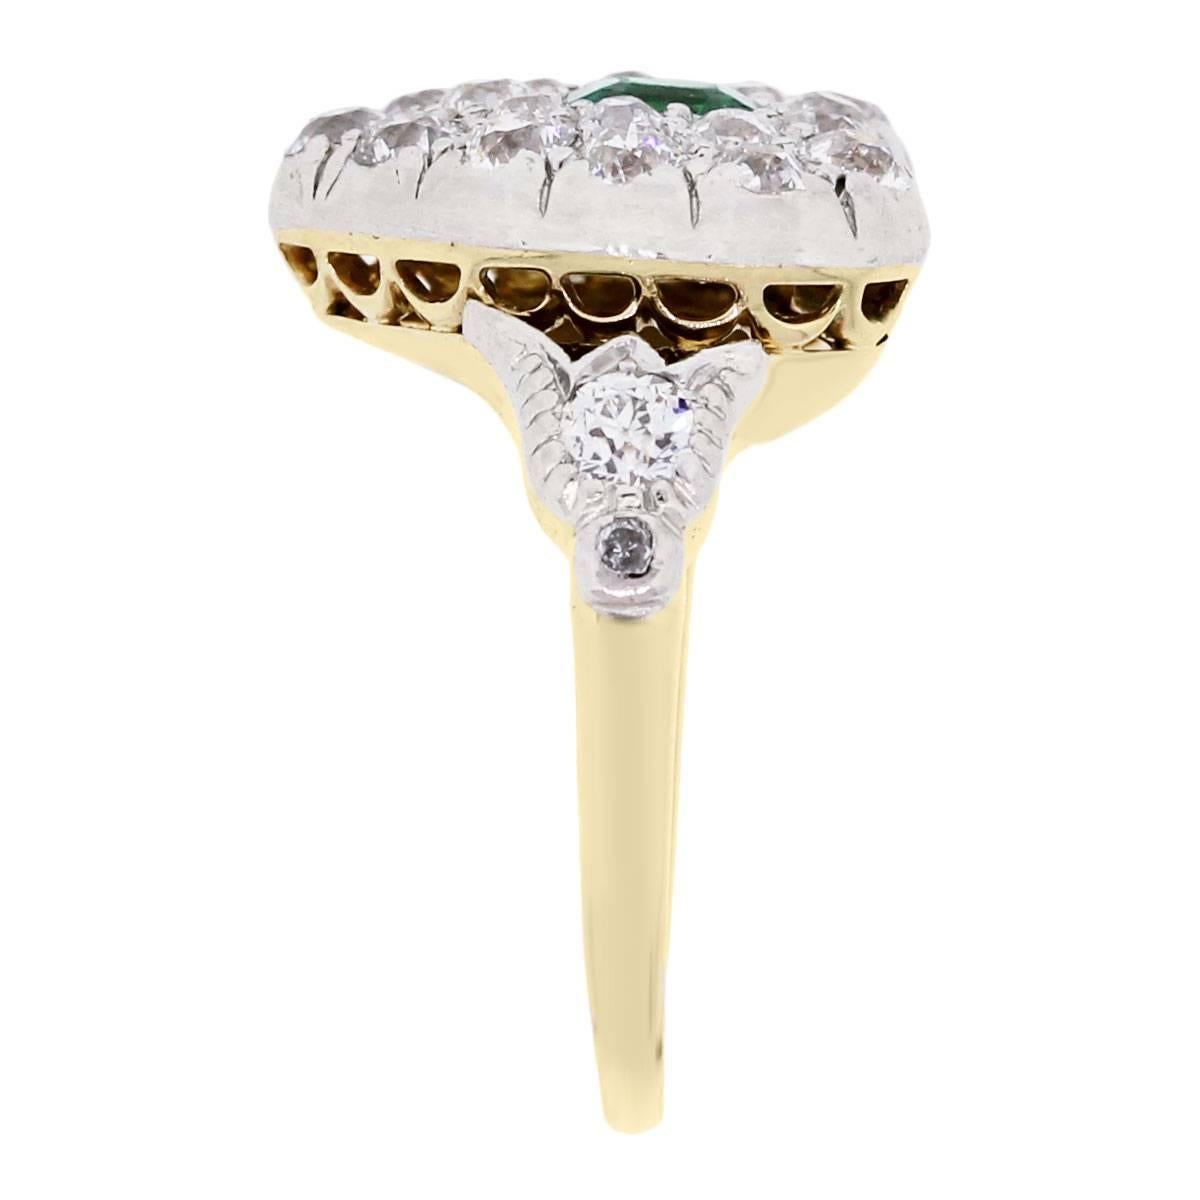 Designer: Tiffany & Co.
Material: 18k yellow gold and platinum
Diamond details: Approximately 0.90ctw of Old European cut diamonds. Diamonds are G/H in color and VS in clarity
Gemstone details: Approximately 0.40ctw natural Emerald measuring